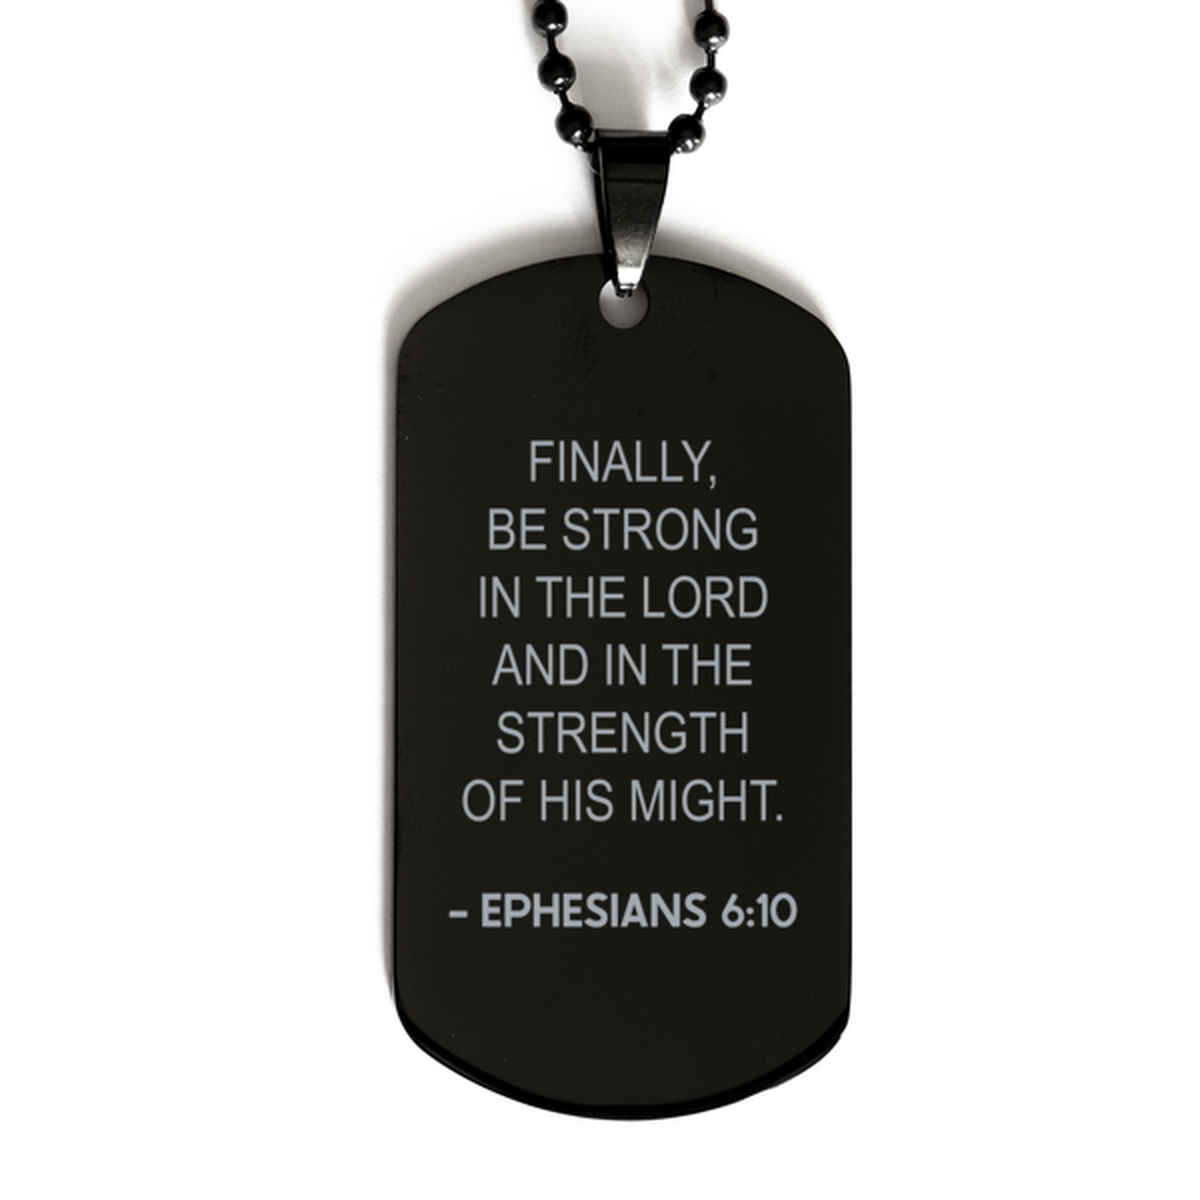 Bible Verse Black Dog Tag, Ephesians 6:10 Finally, Be Strong In The Lord And In The, Christian Inspirational Necklace Gifts For Men Women